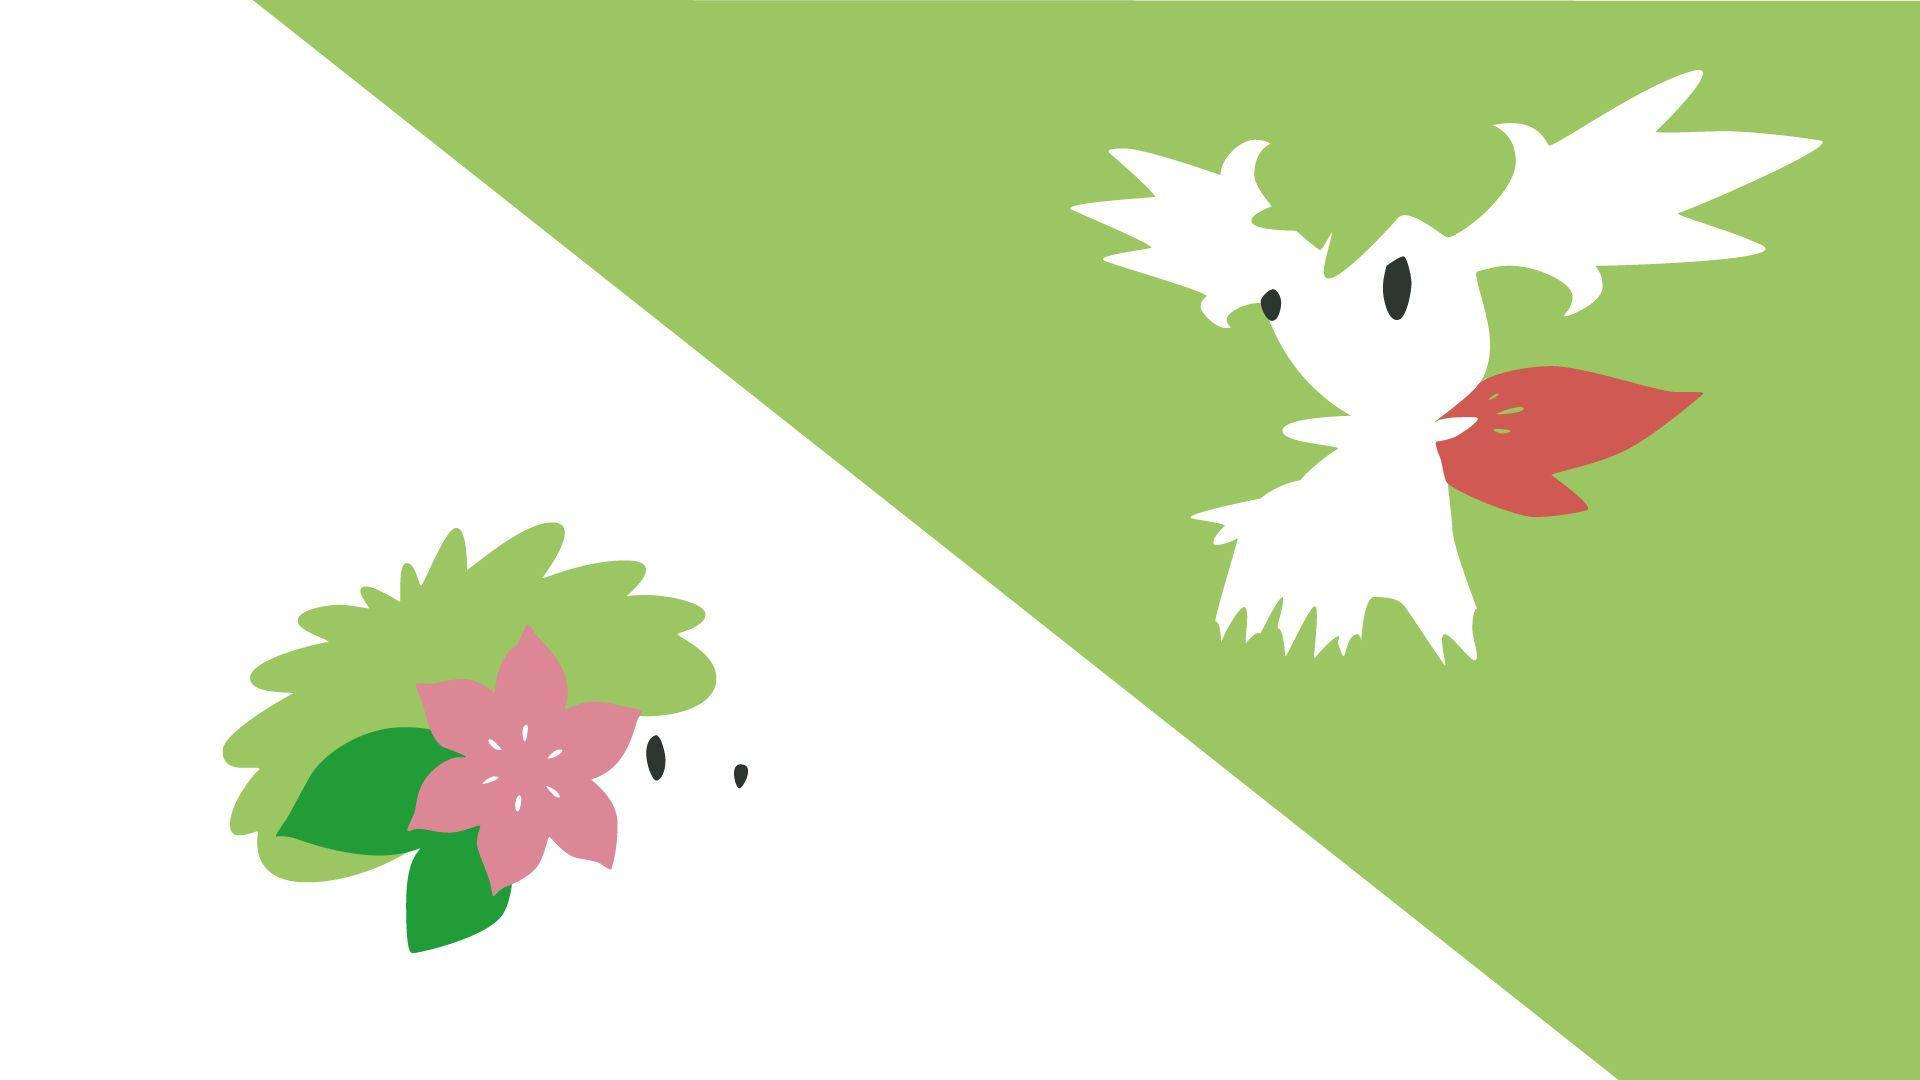 Download Transformative Shaymin in Sky Forme - Pokemon Power at its Fullest  Wallpaper